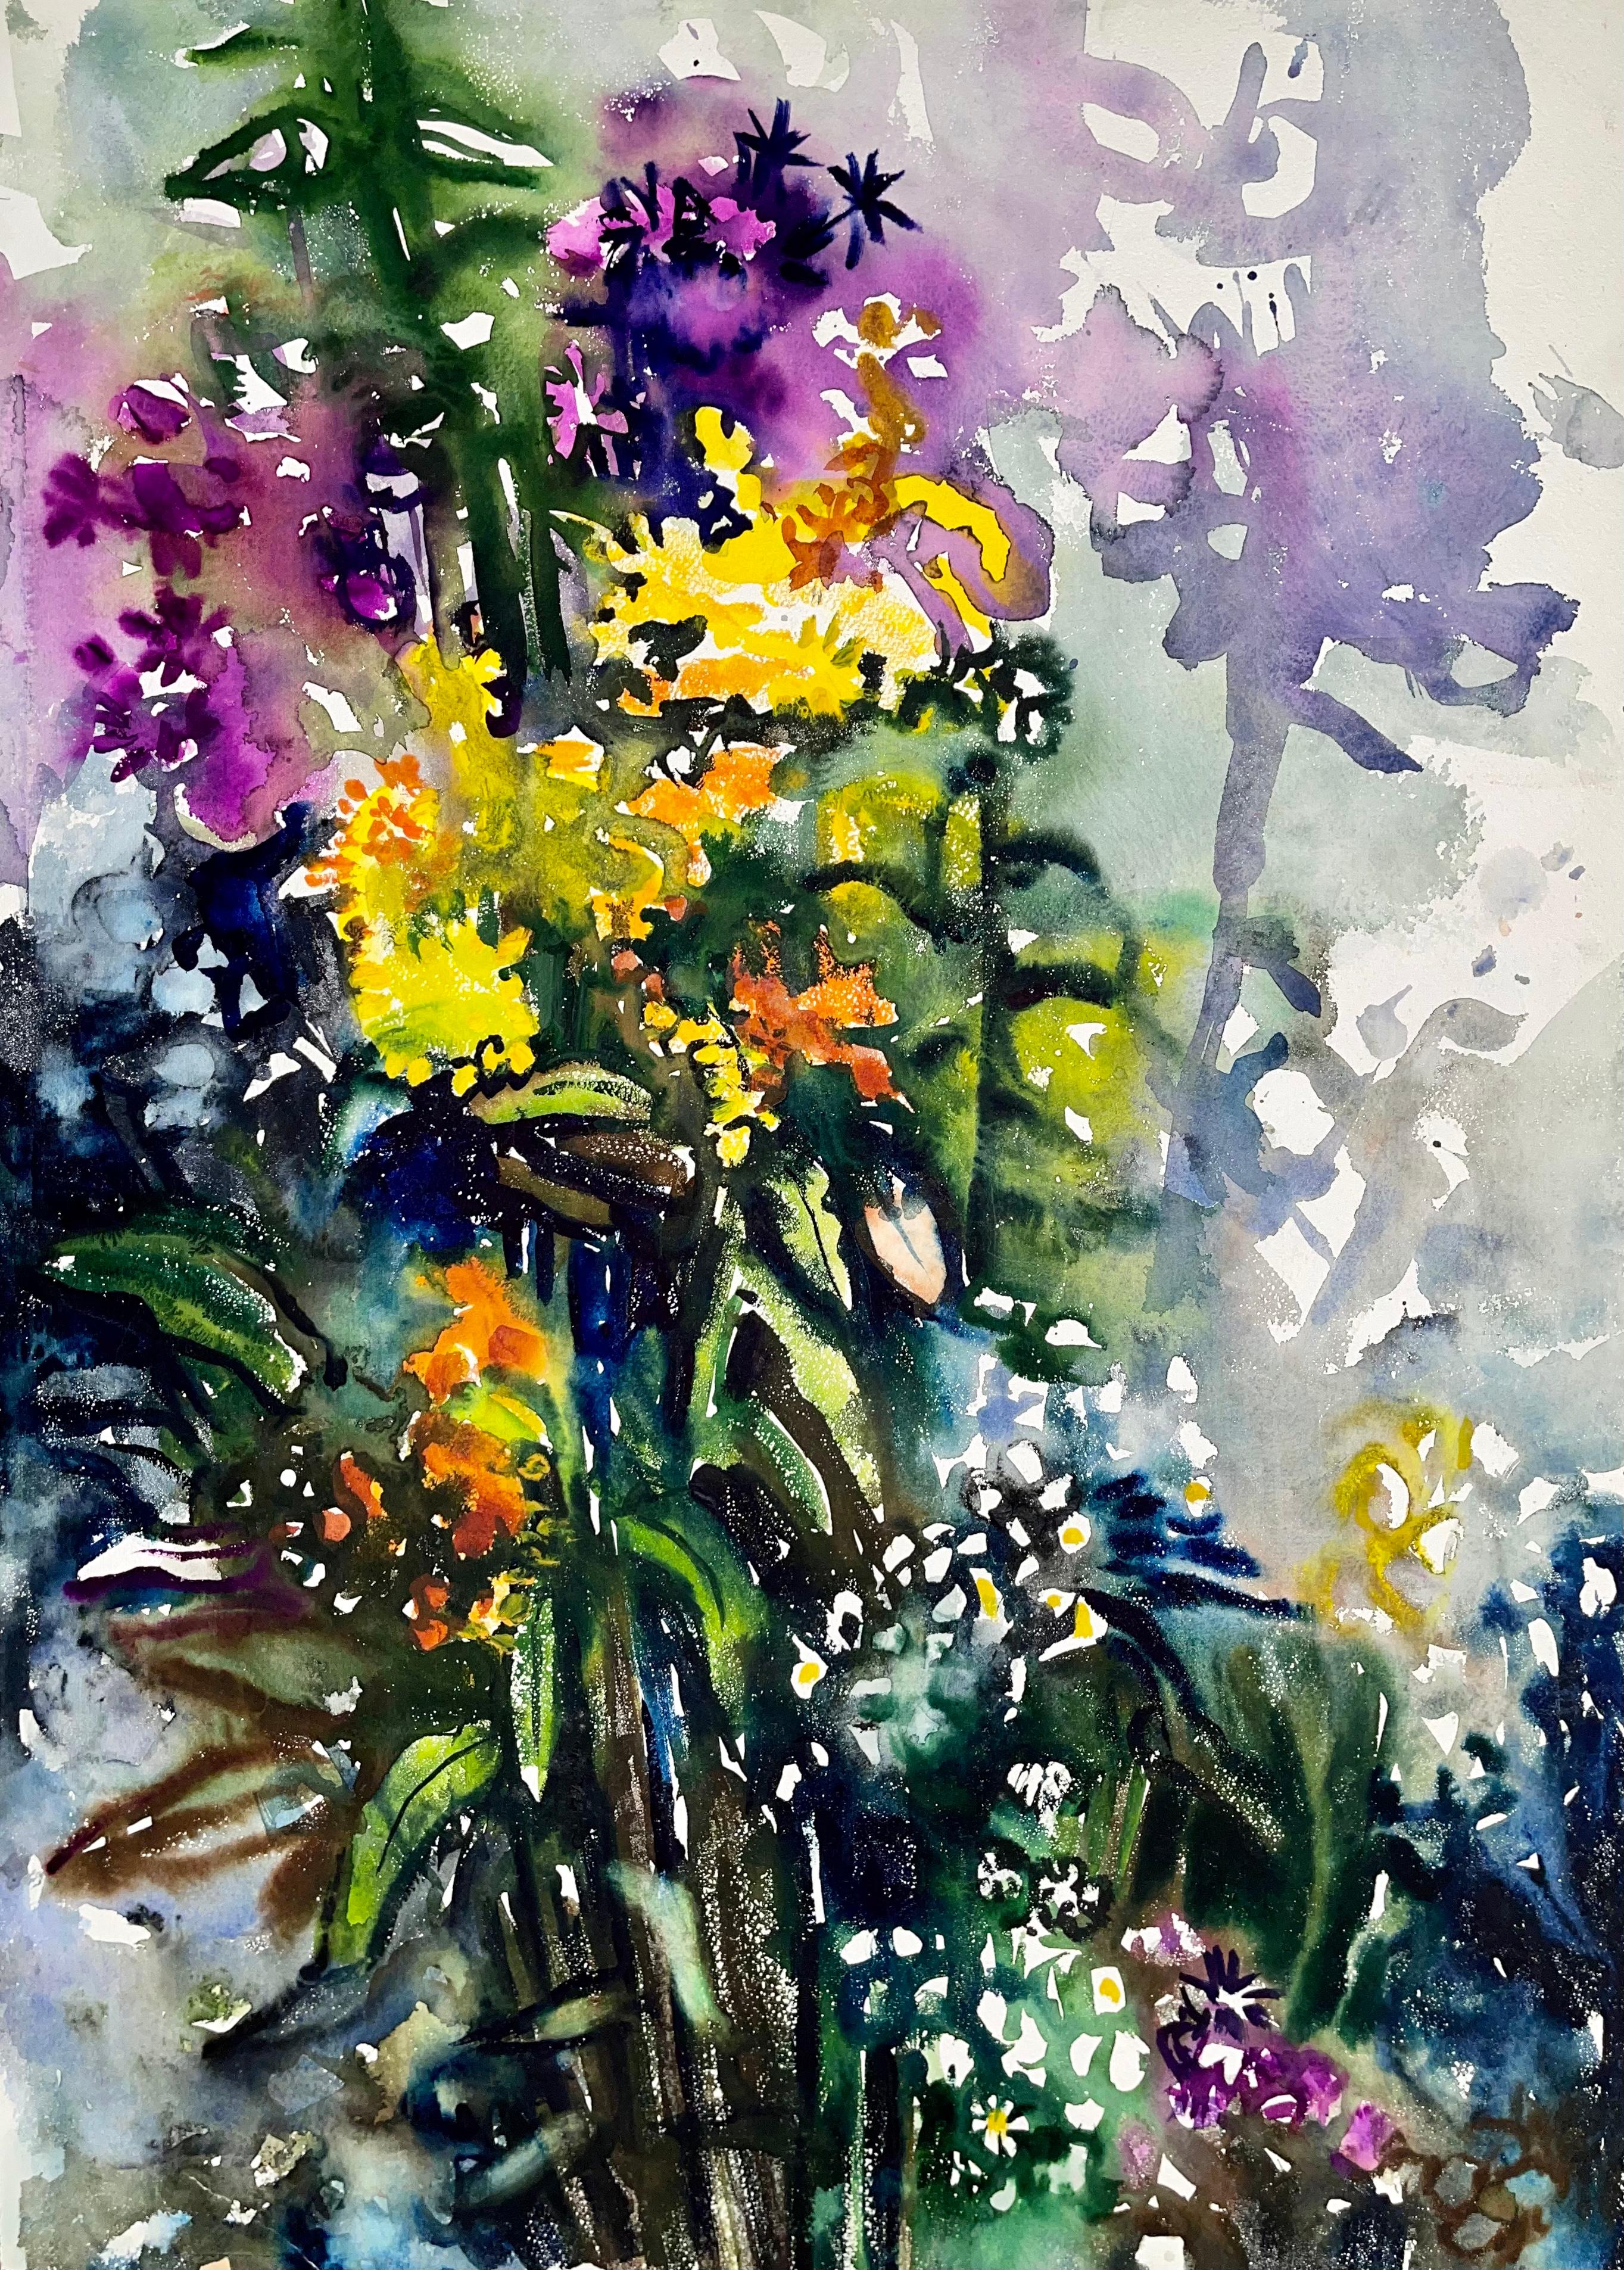 Ian Hornak Still-Life Painting - Untitled (Abstract Still Life with Cascading Flowers)